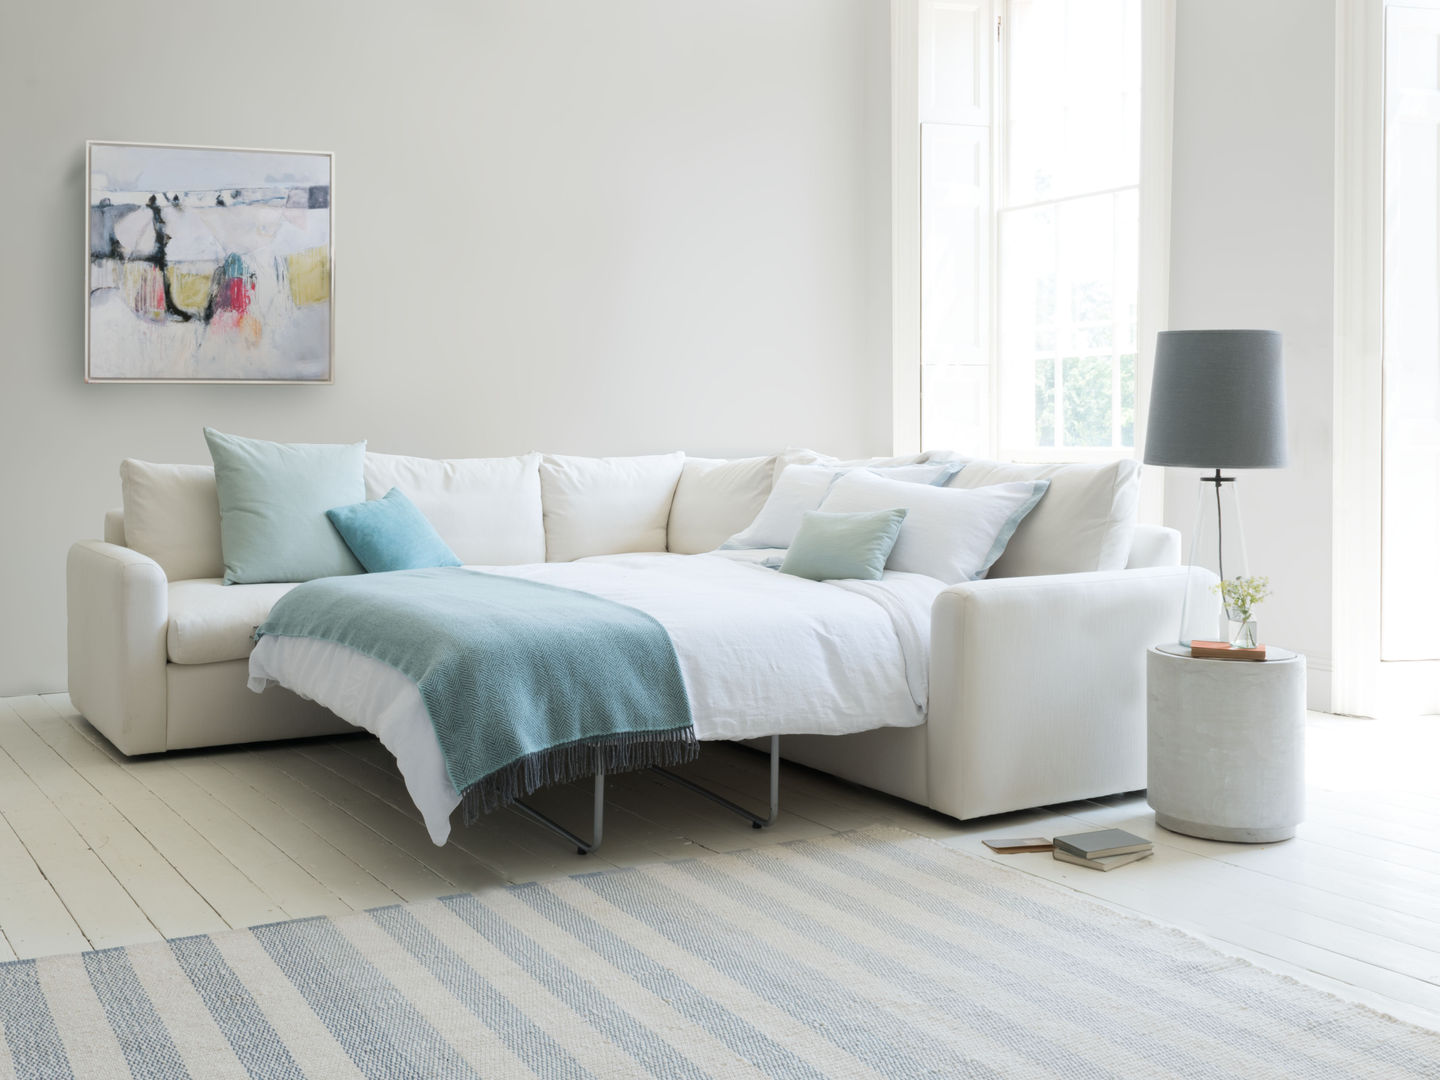 Chatnap with sofa bed Loaf Moderne Wohnzimmer sofa,living room,home,modular sofa,sofa bed,linen,white,space